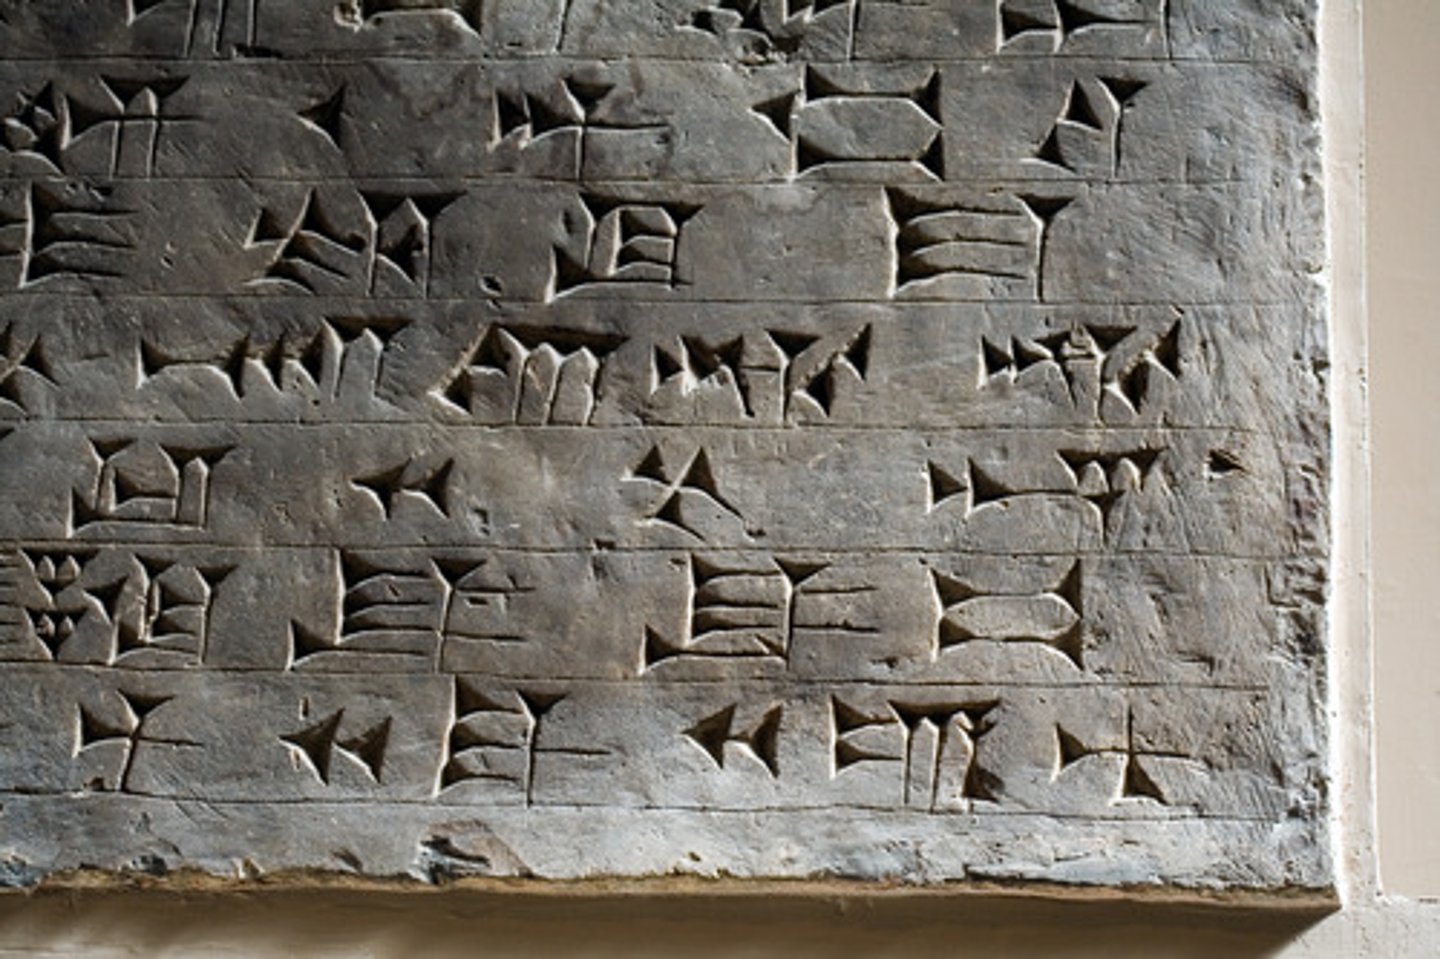 <p>One of the first written languages known: A system of writing in which wedge-shaped symbols represented words or syllables. It originated in Mesopotamia and was used initially for Sumerian and Akkadian but later was adapted to represent other languages of western Asia.</p>